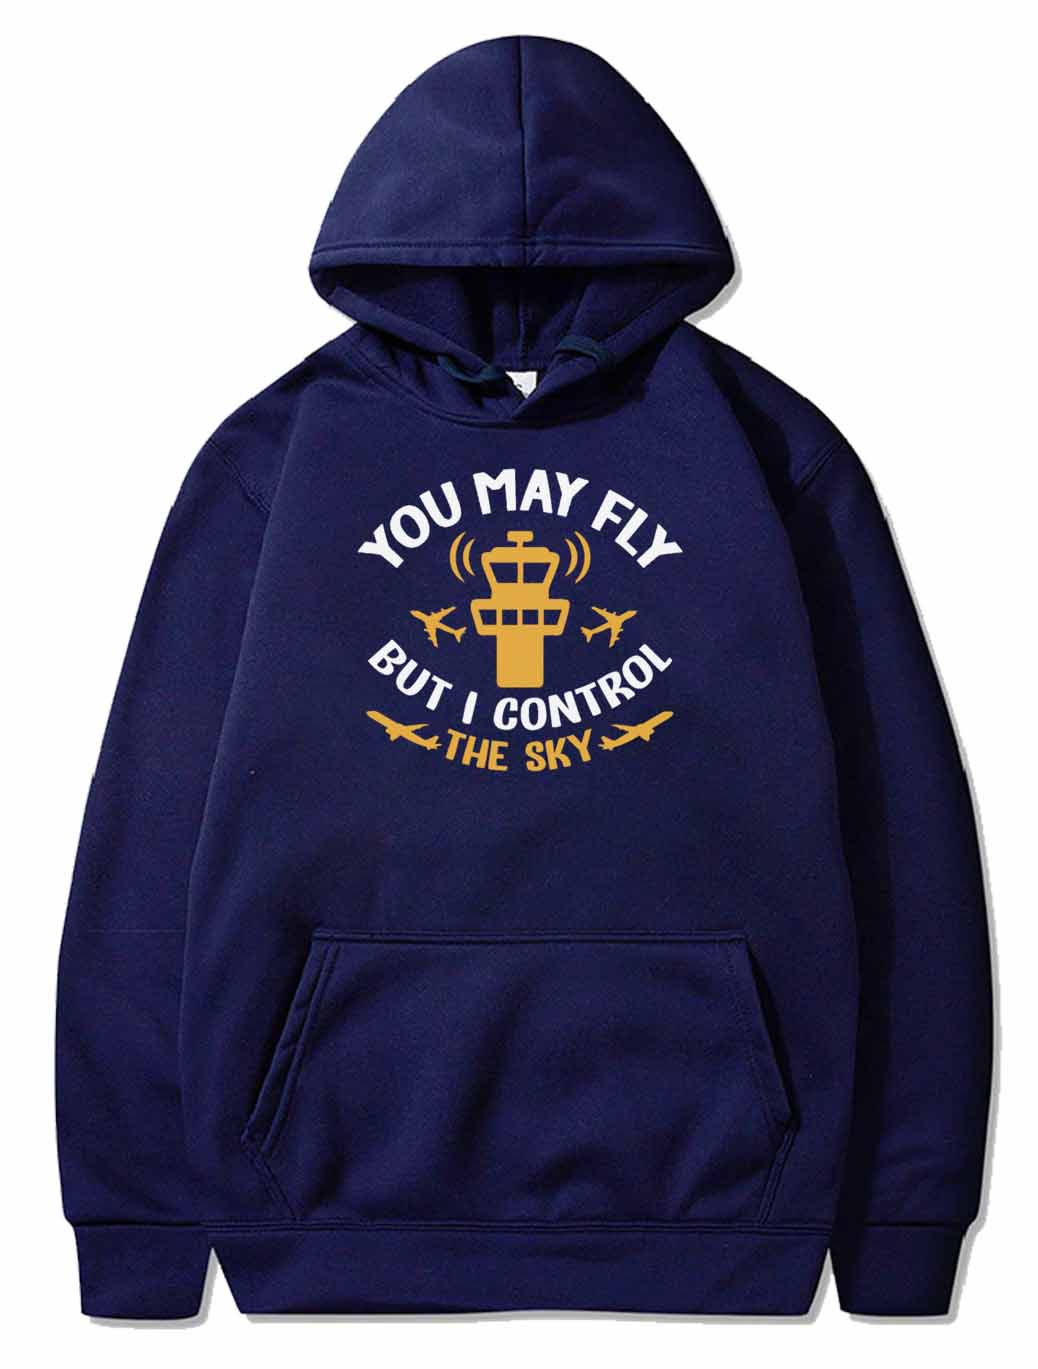 You May Fly But I Control The Sky   PULLOVER THE AV8R